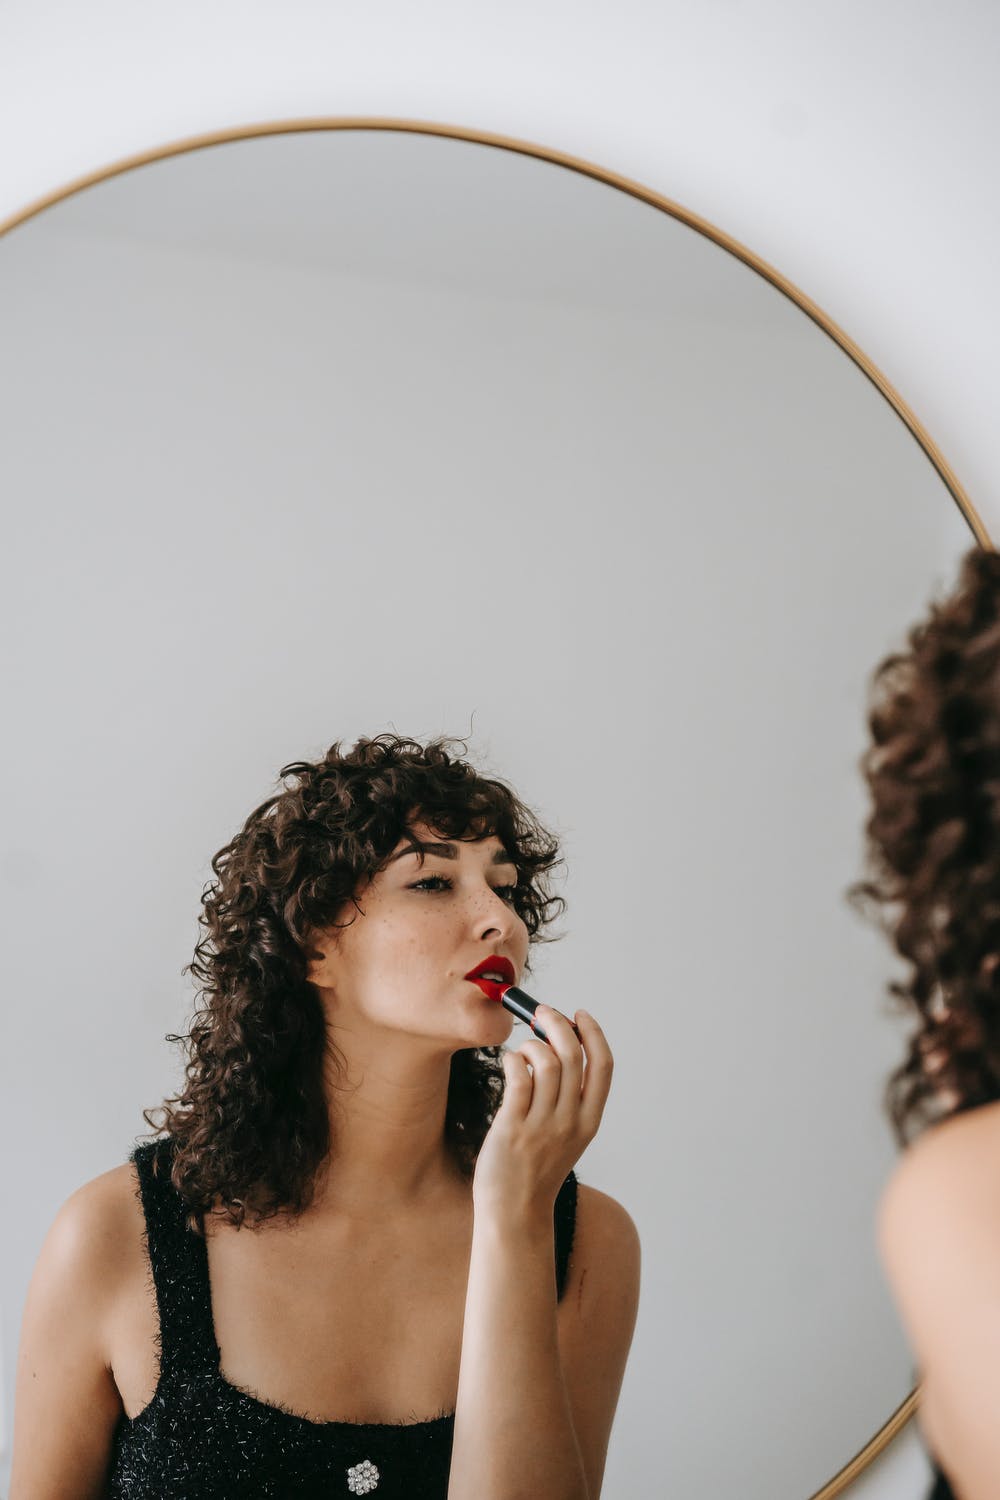 Top 4 Things To Look For While Buying A Makeup Mirror